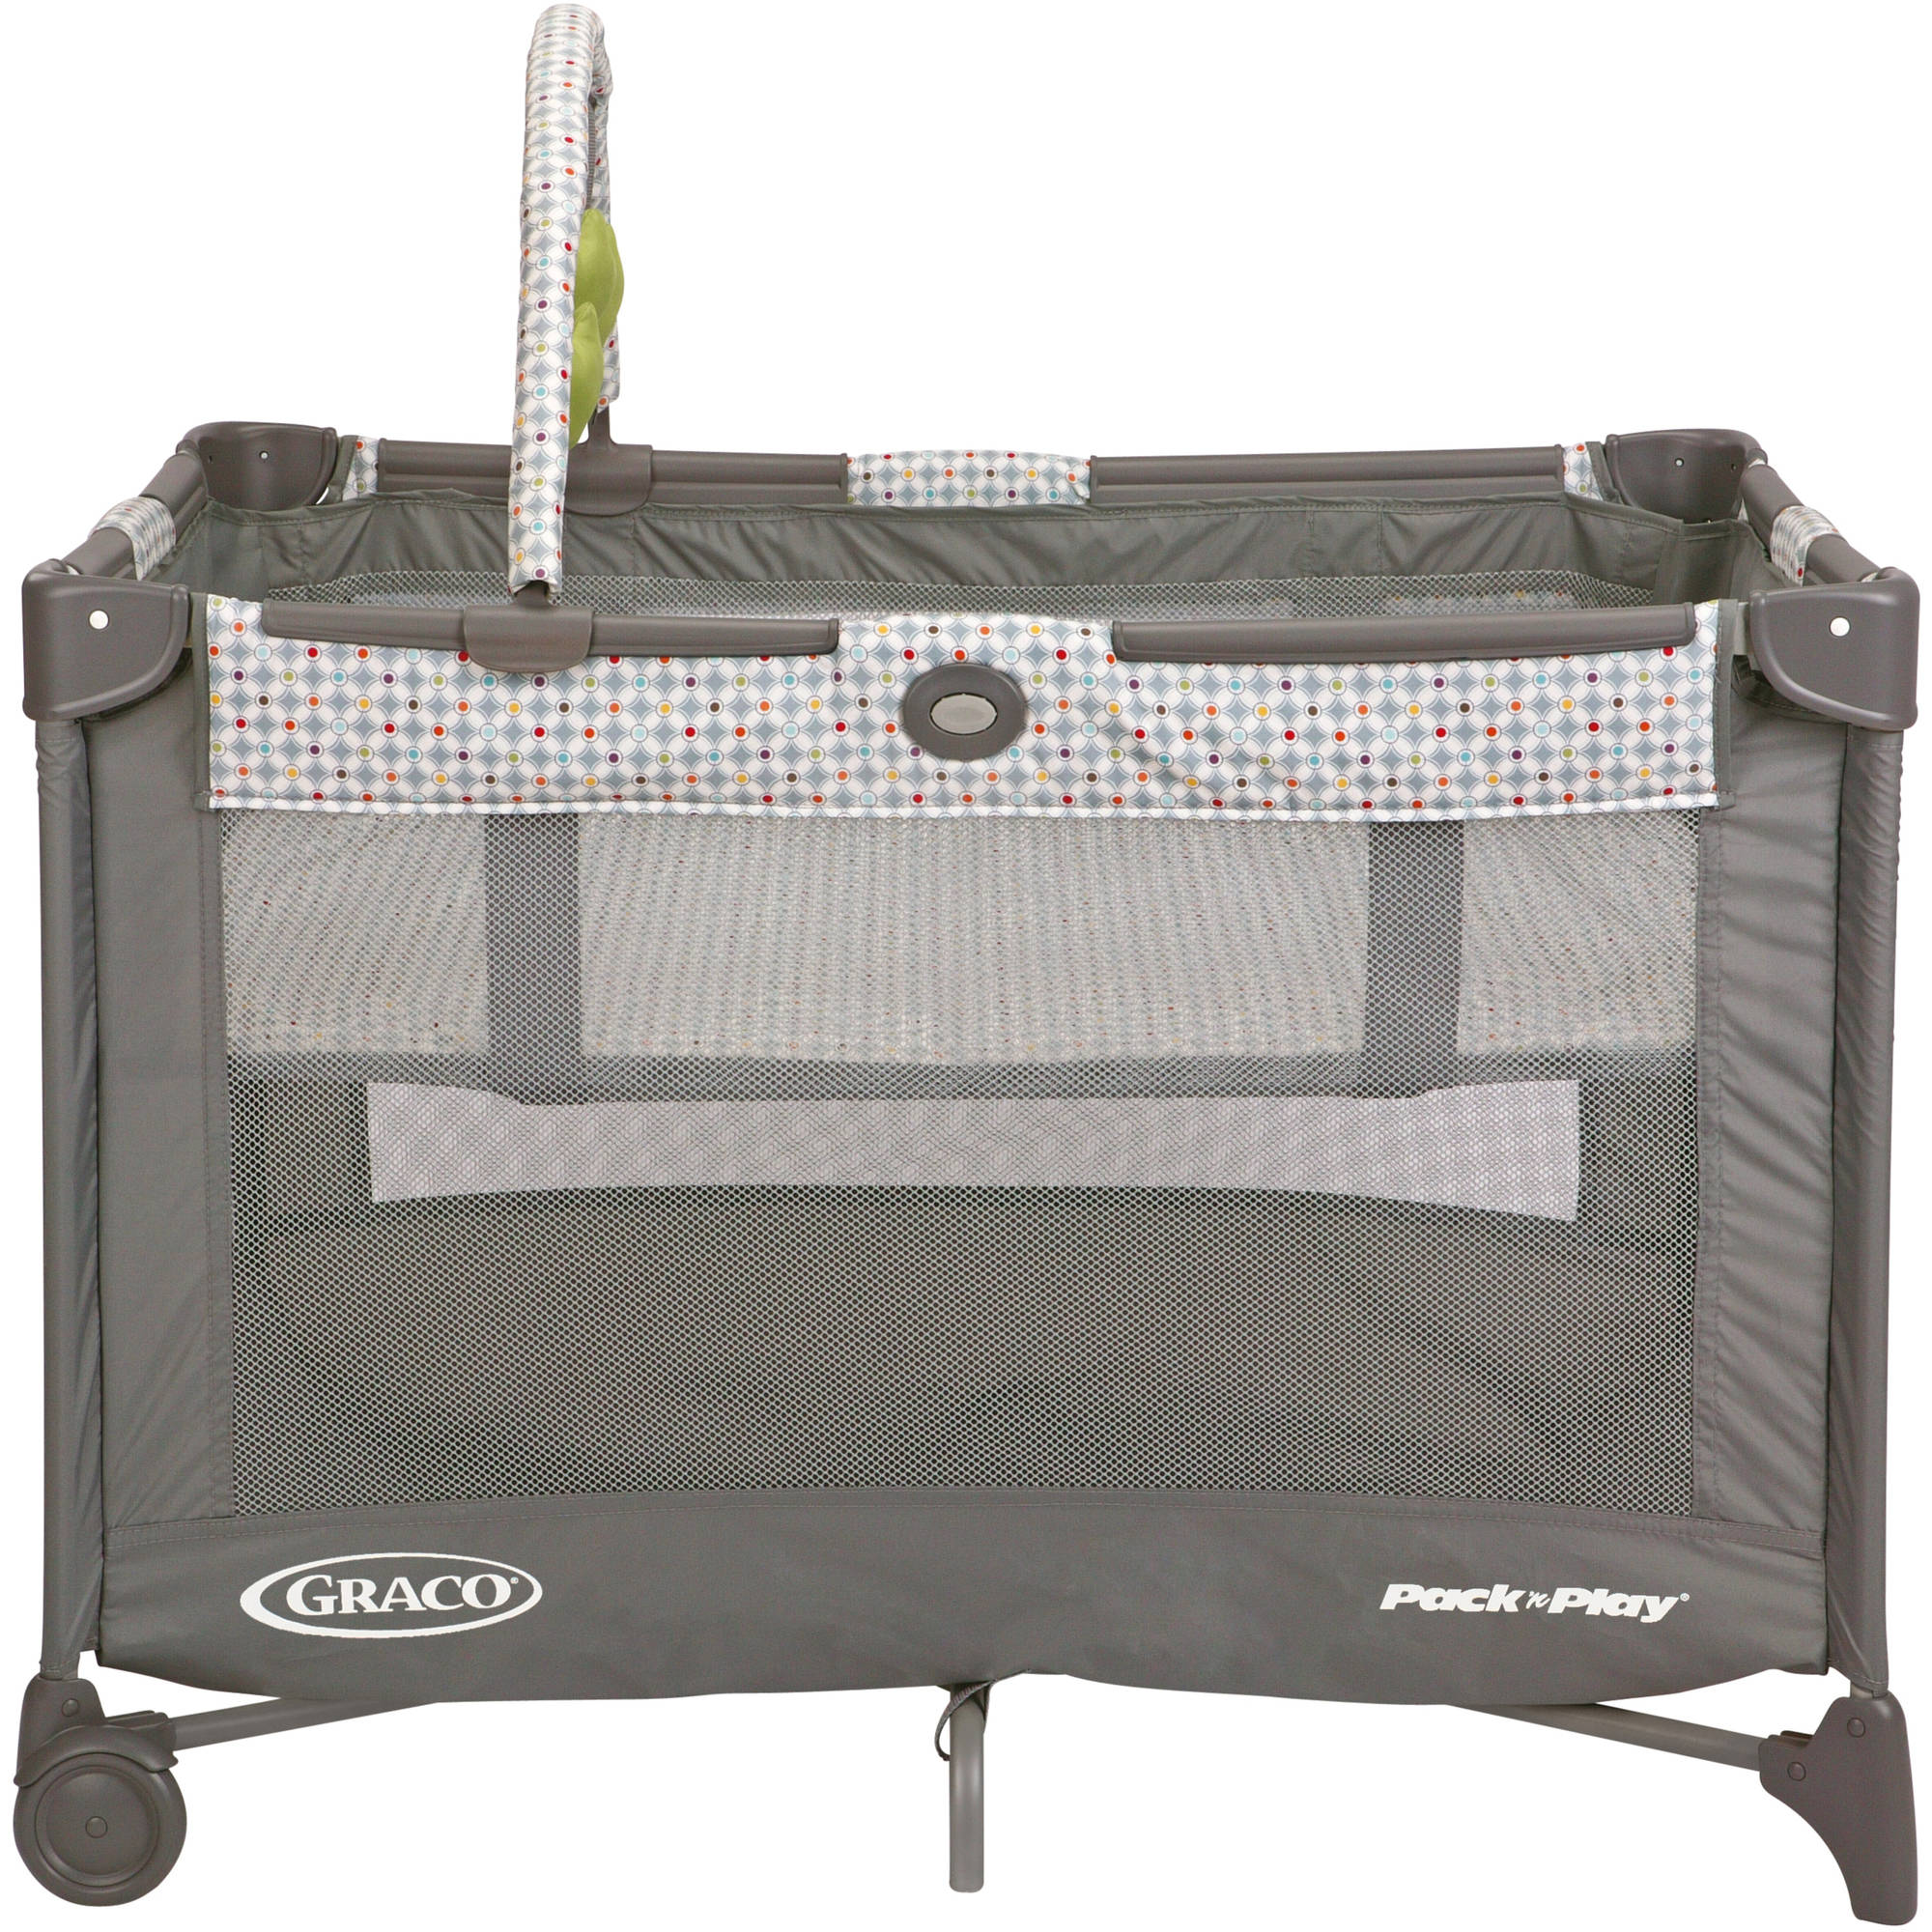 Graco Pack 'n Play On the Go Playard with Bassinet, Pasadena - image 4 of 7